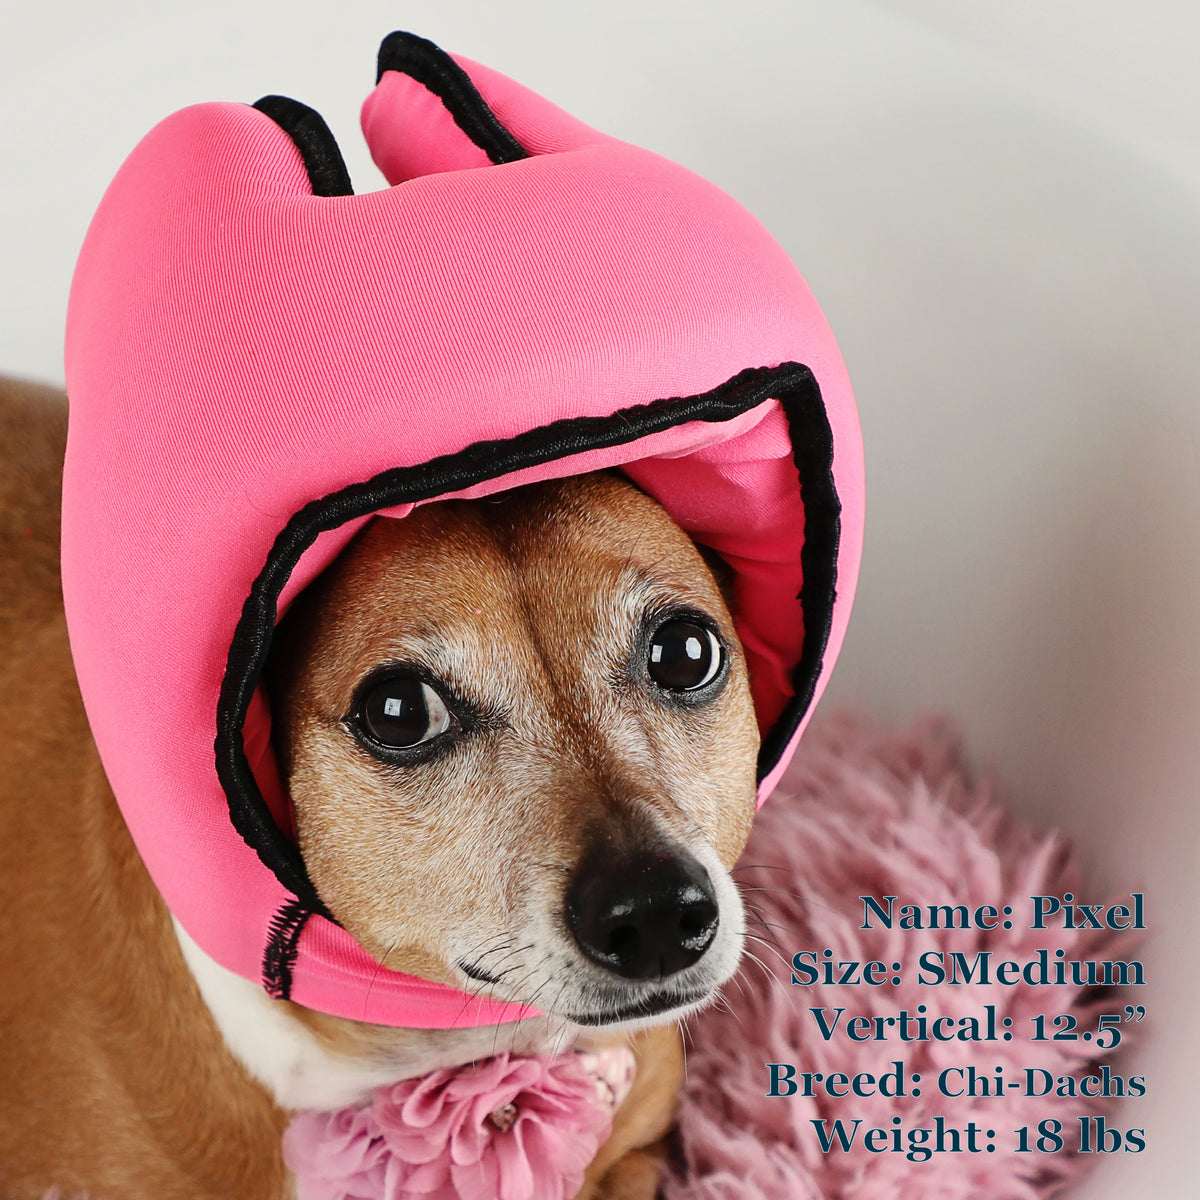 Pixel is a Chiweenie in a SMedium Pink PAWNIX Noise Cancelling Headset for dogs